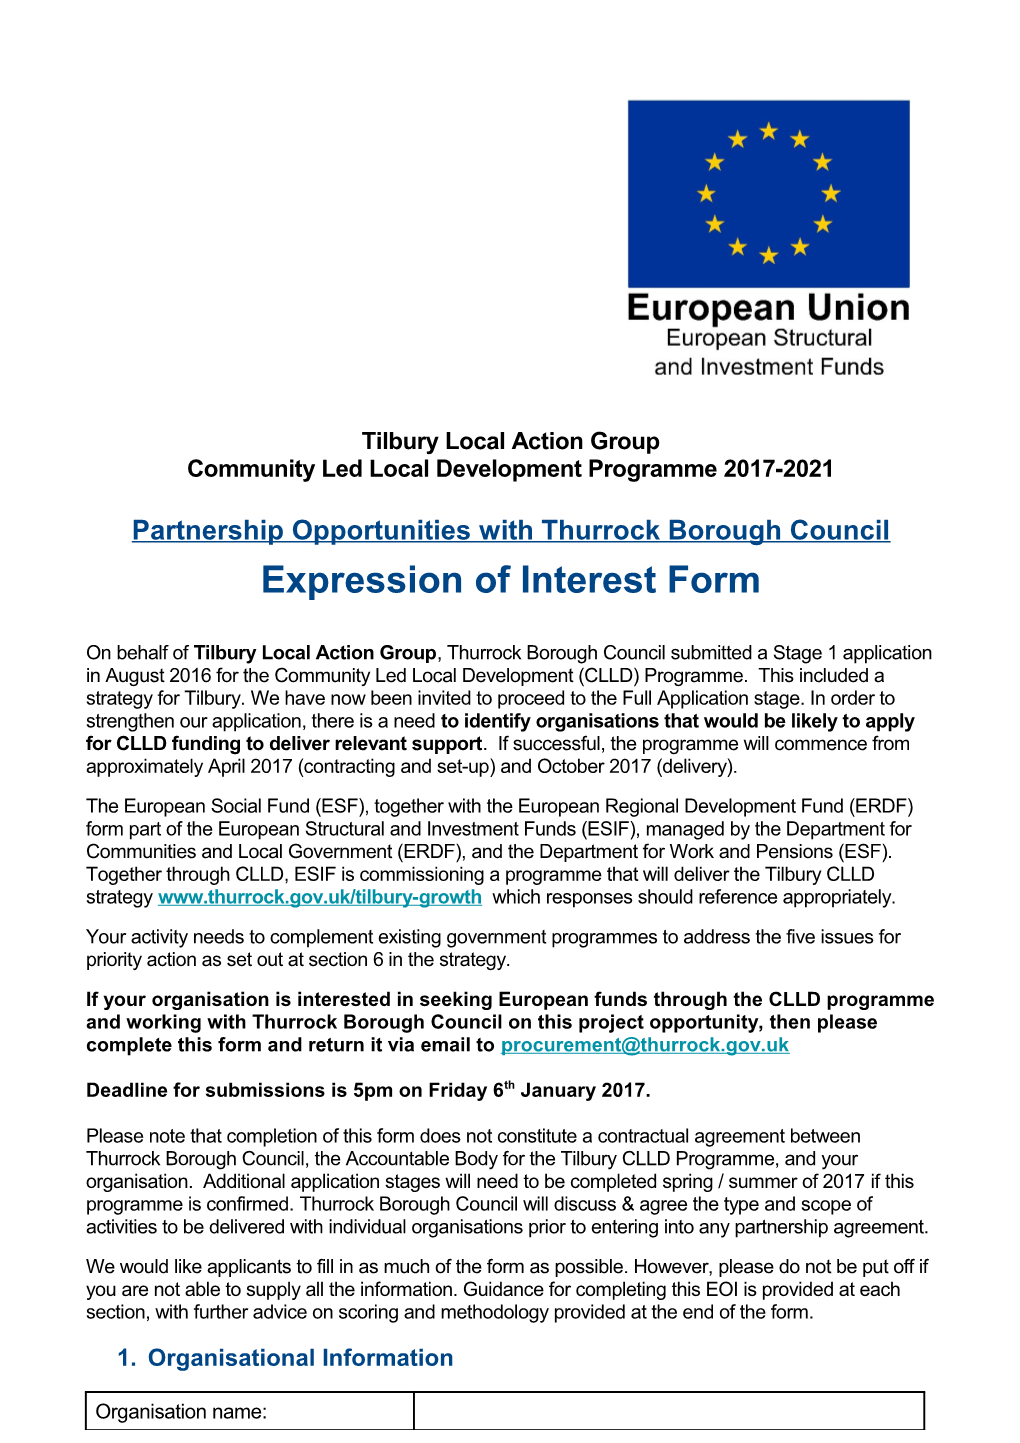 Thurrock Council - Expression of Interest: Tilbury Community-Led Local Development